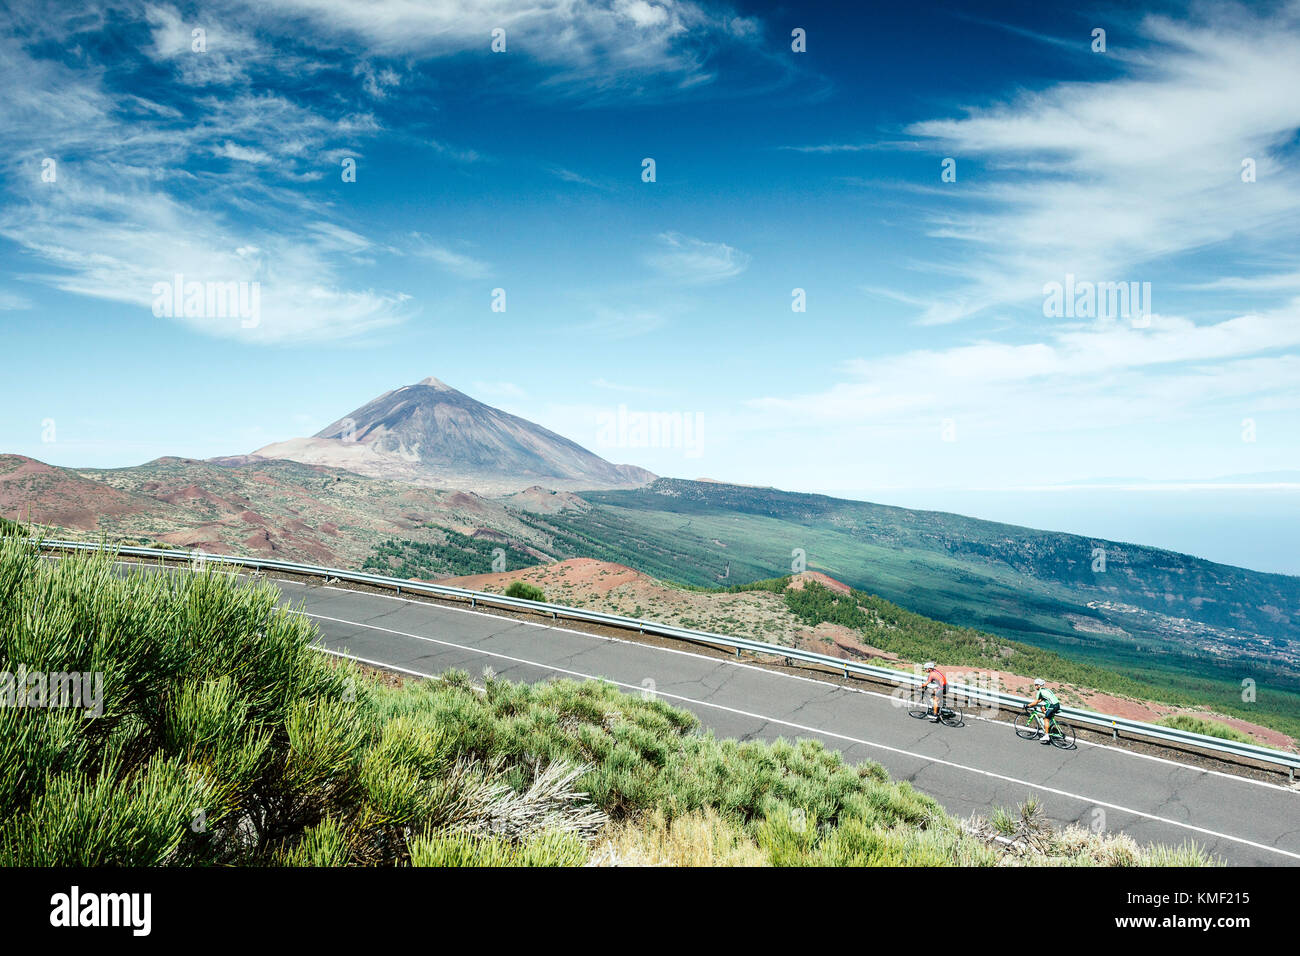 Two cyclists pedaling on mountain road with Mount Teide in background,Teide National Park,Tenerife,Canary Islands,Spain Stock Photo